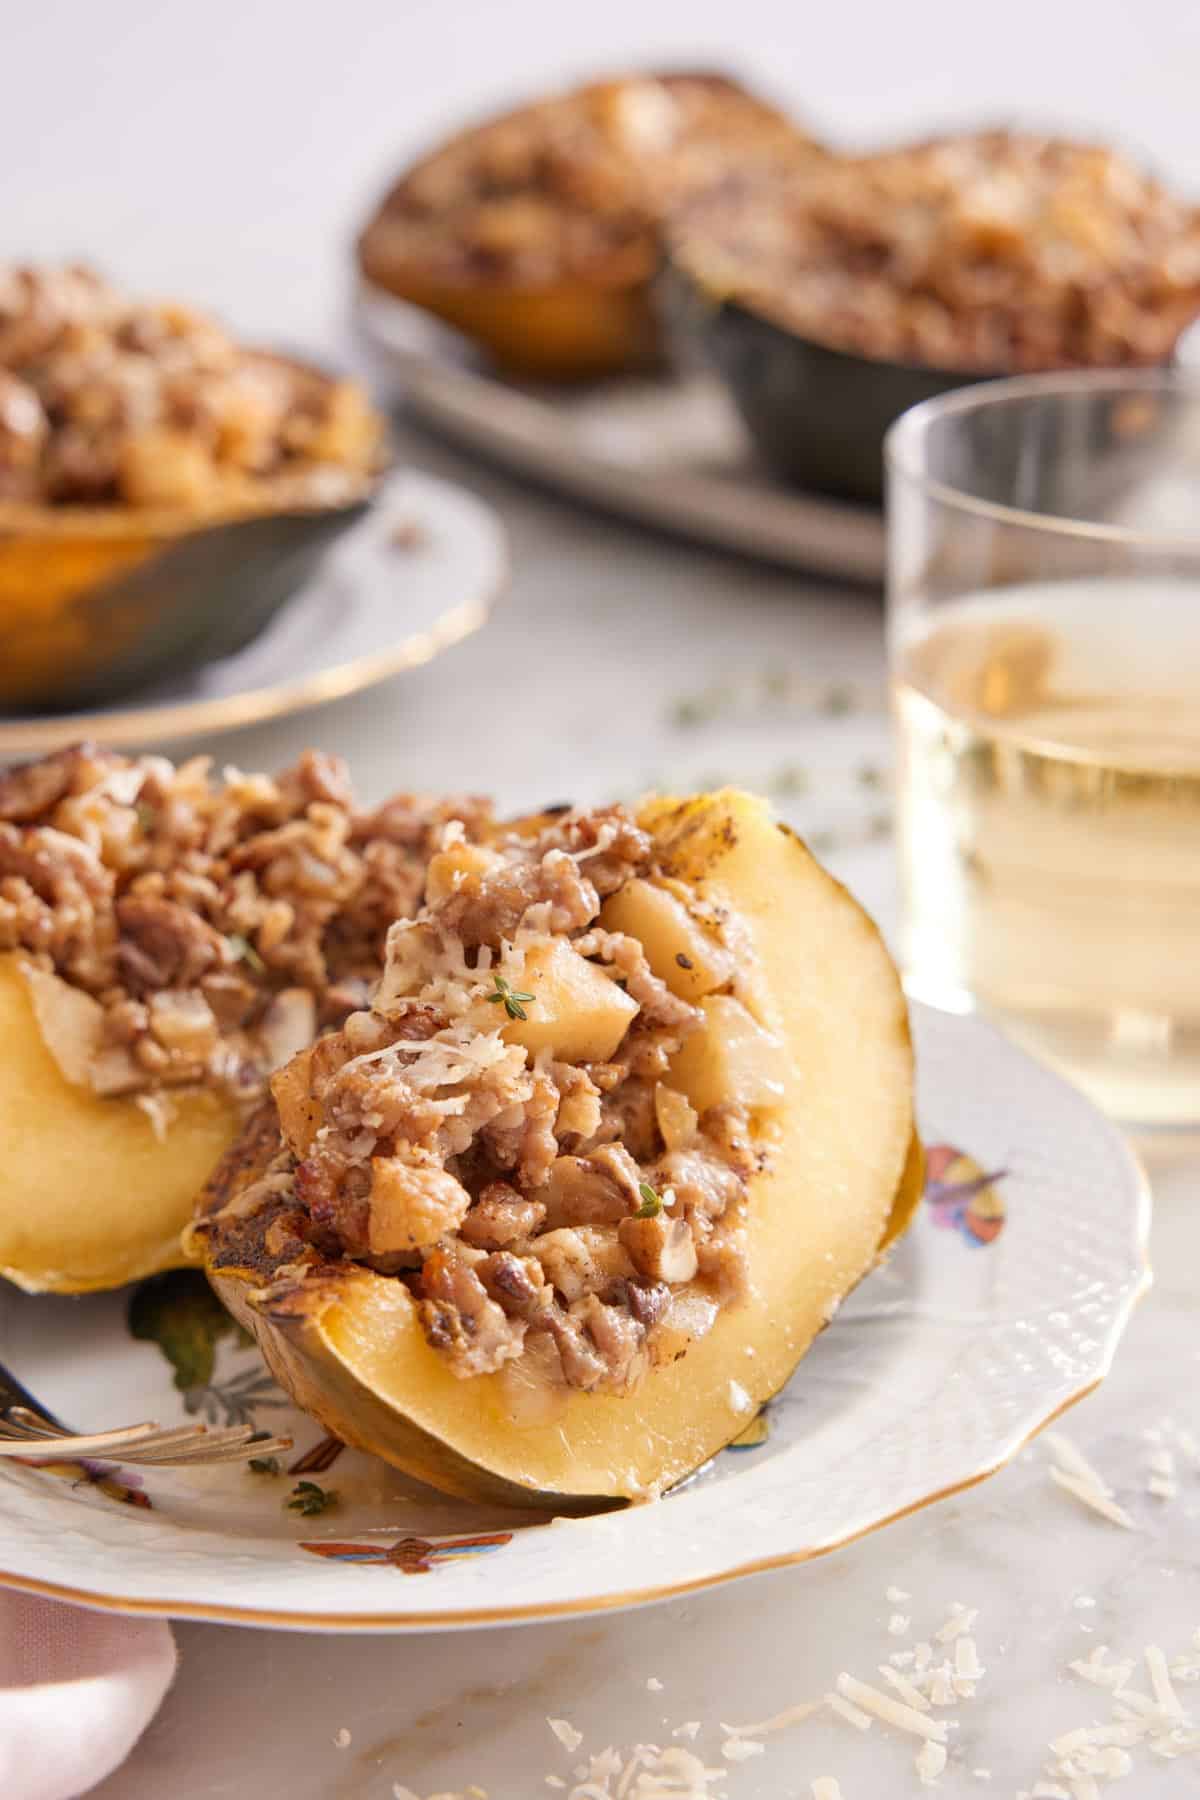 A plate with a stuffed acorn squash cut in half with a glass of wine and additional squash in the background.